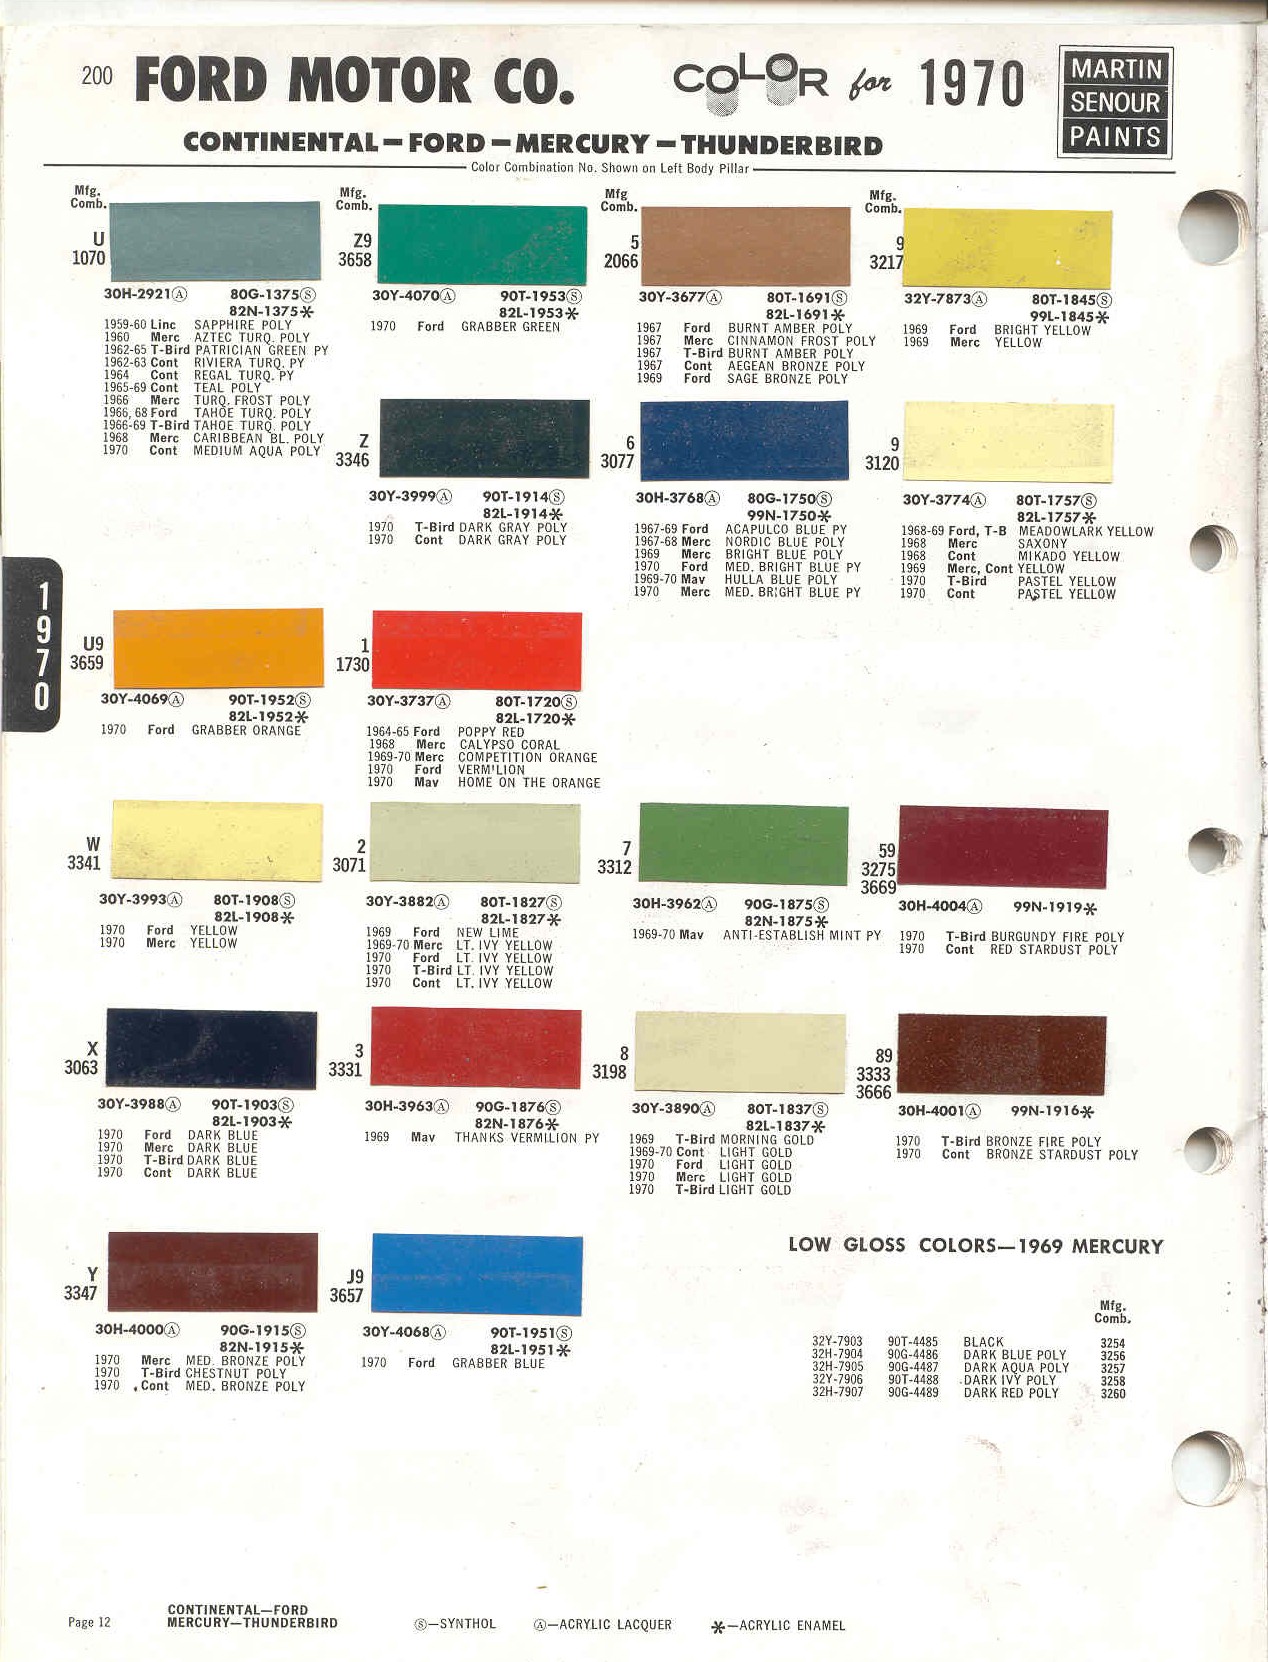 1970 Ford torino paint colors #3